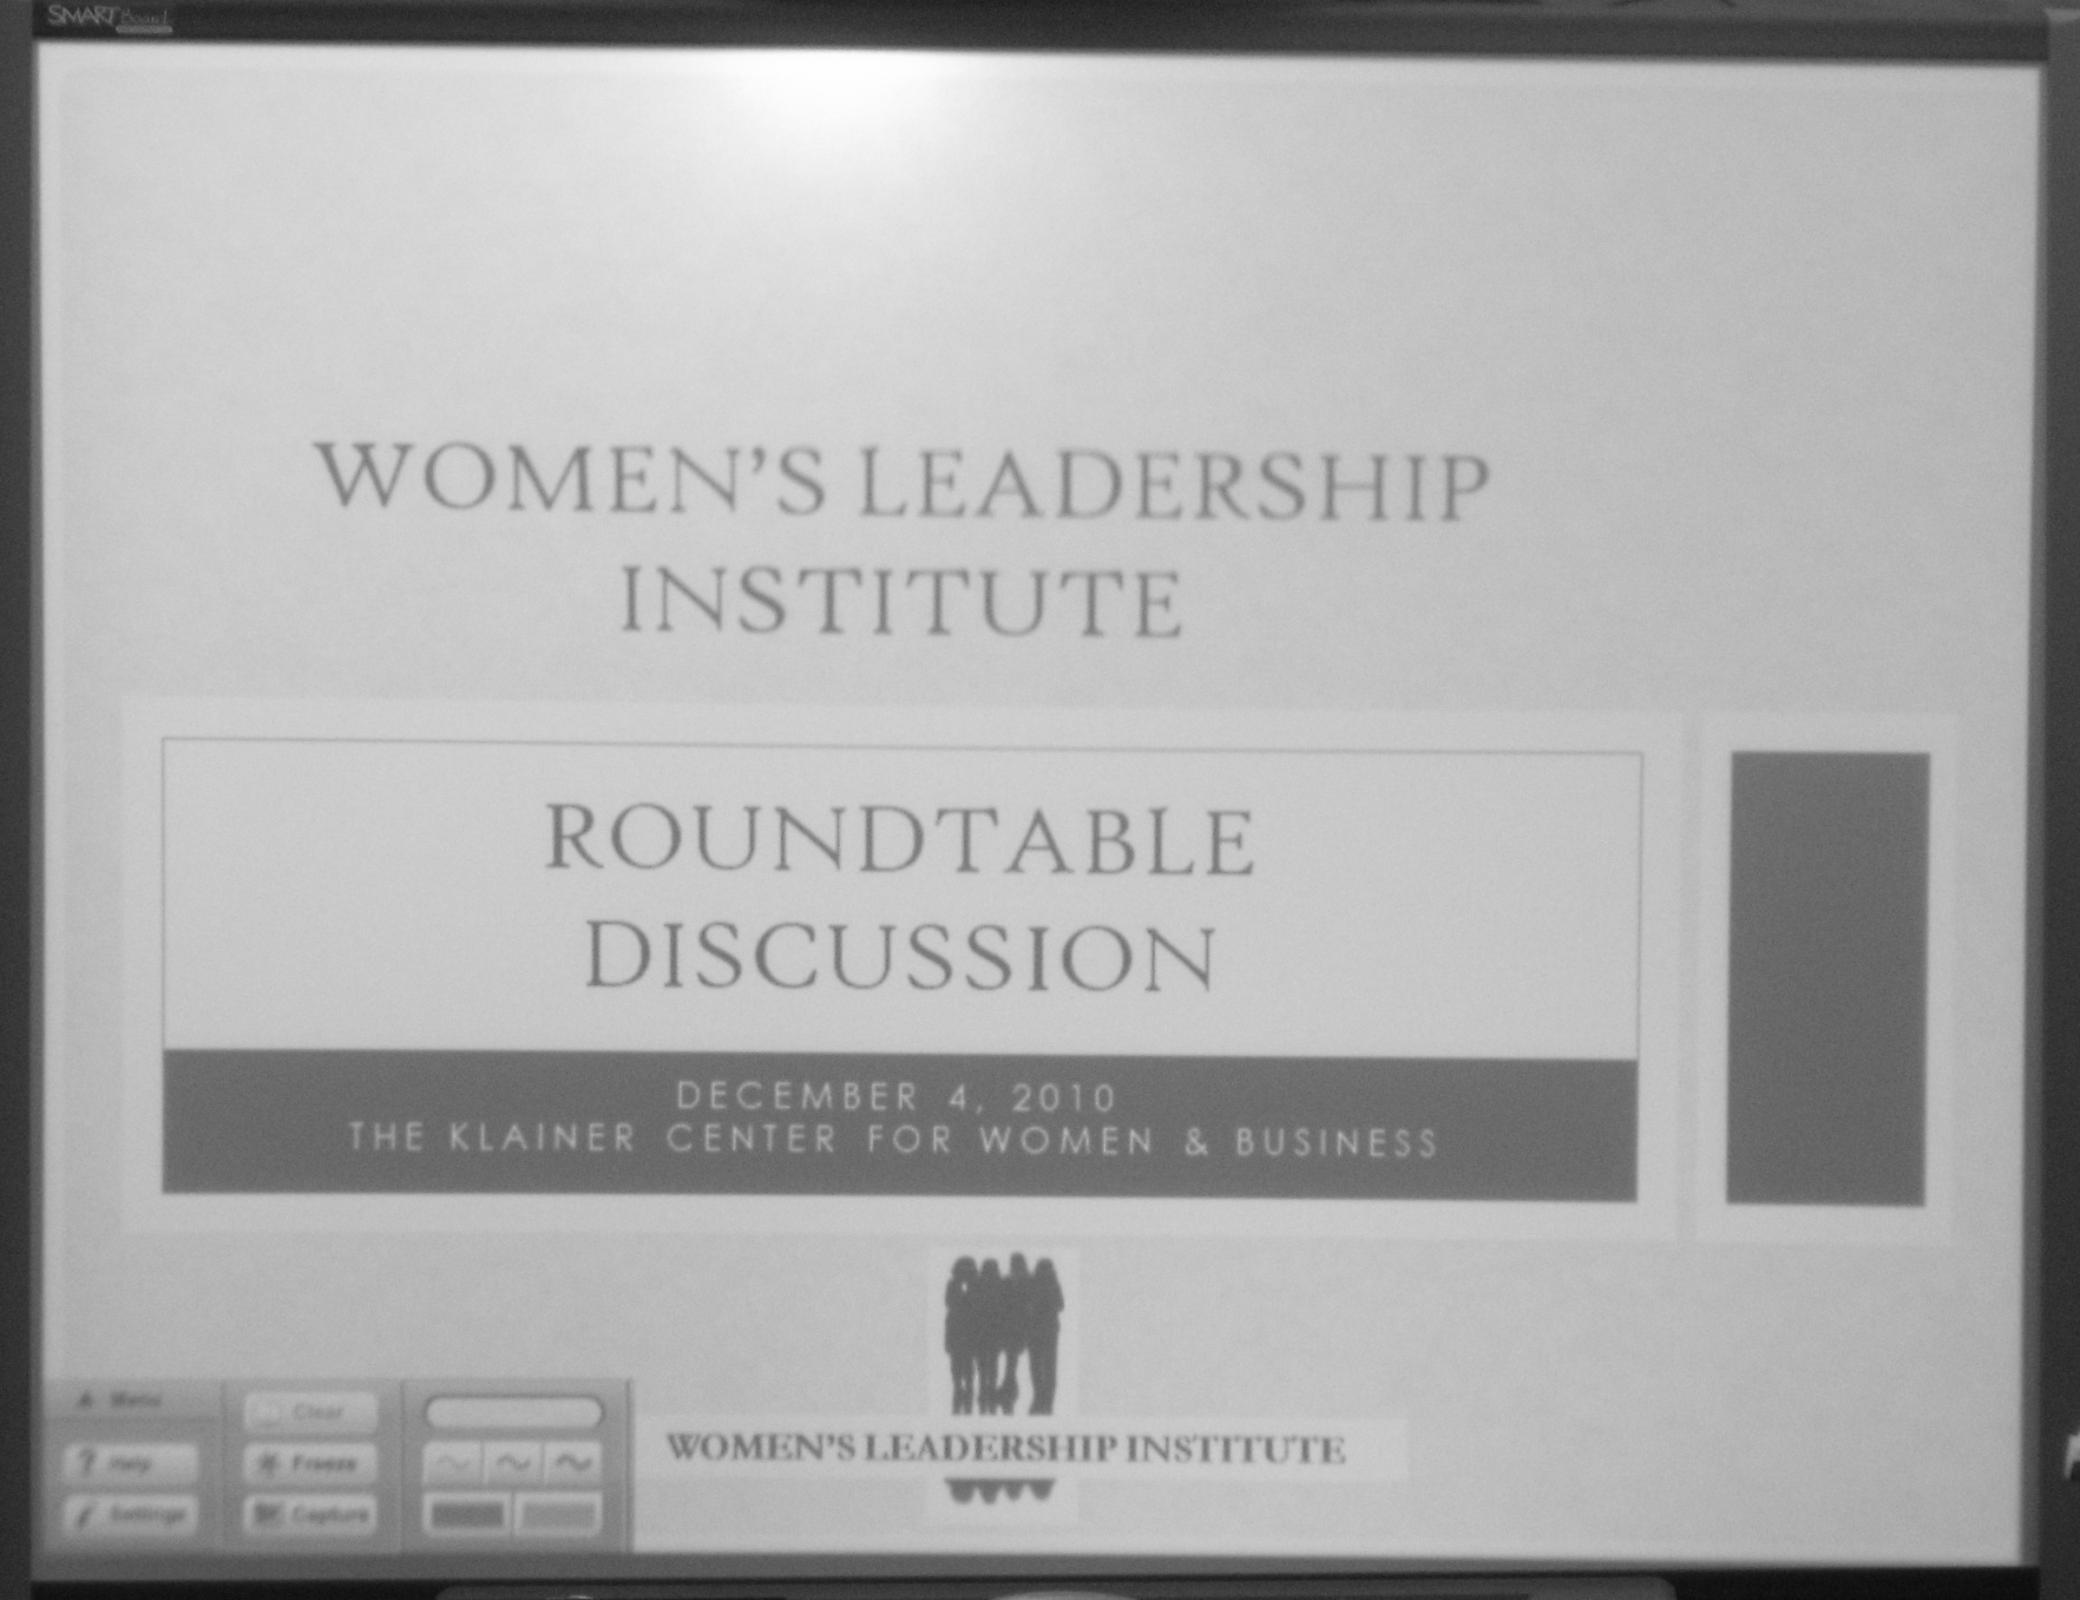 Women's leadership institute roundtable discussion